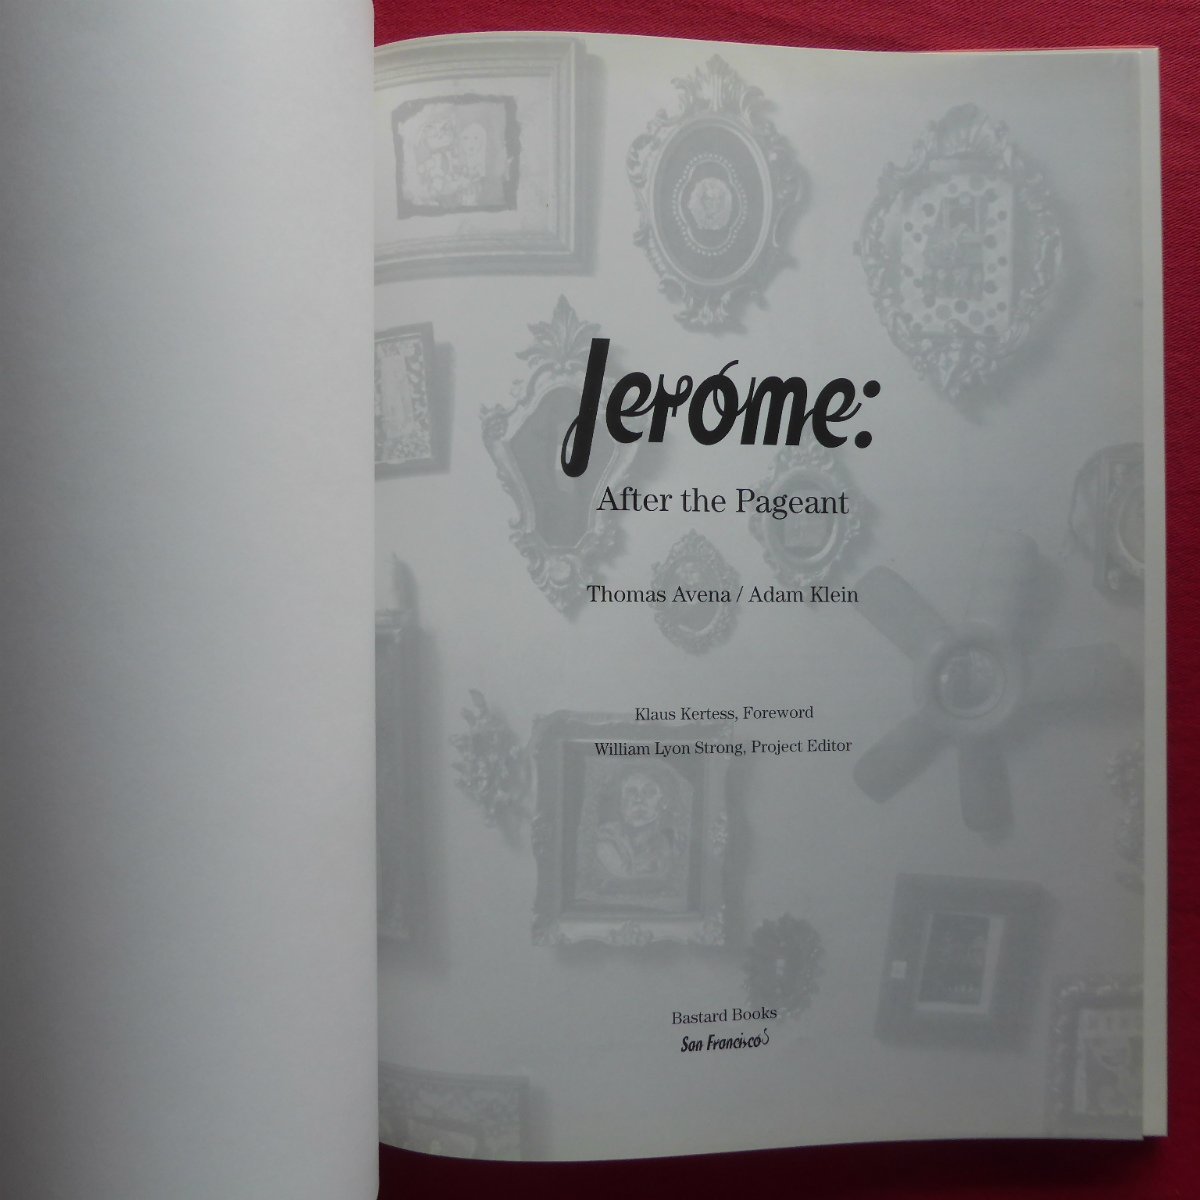 e6洋書【ジェローム・カヤ作品集-ページェントの後/Jerome: After the Pageant】Jerome Caja